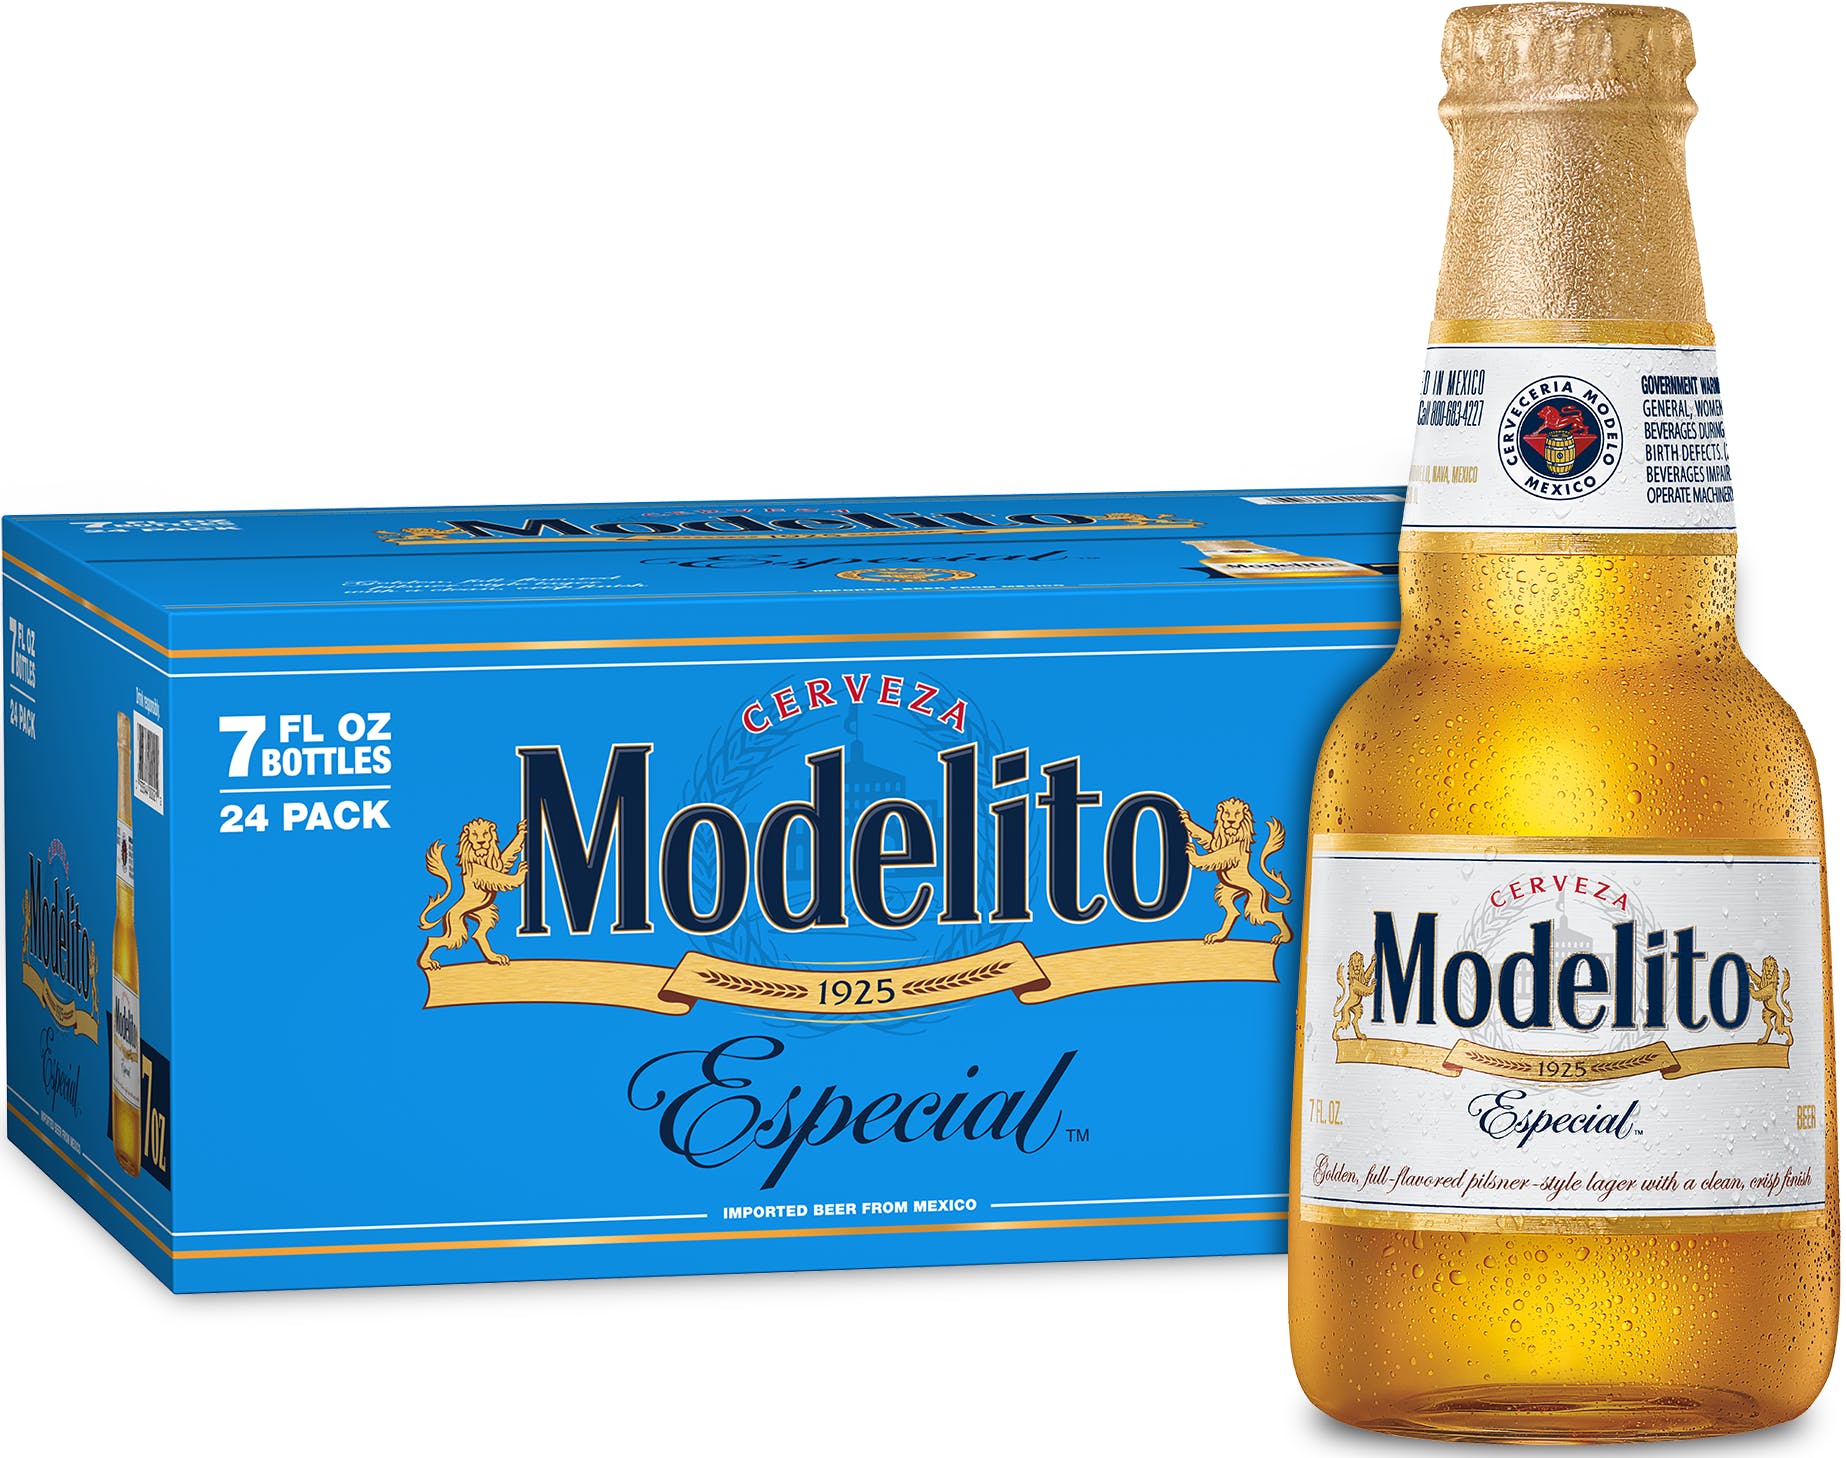 Does Modelo come in a 24-pack?